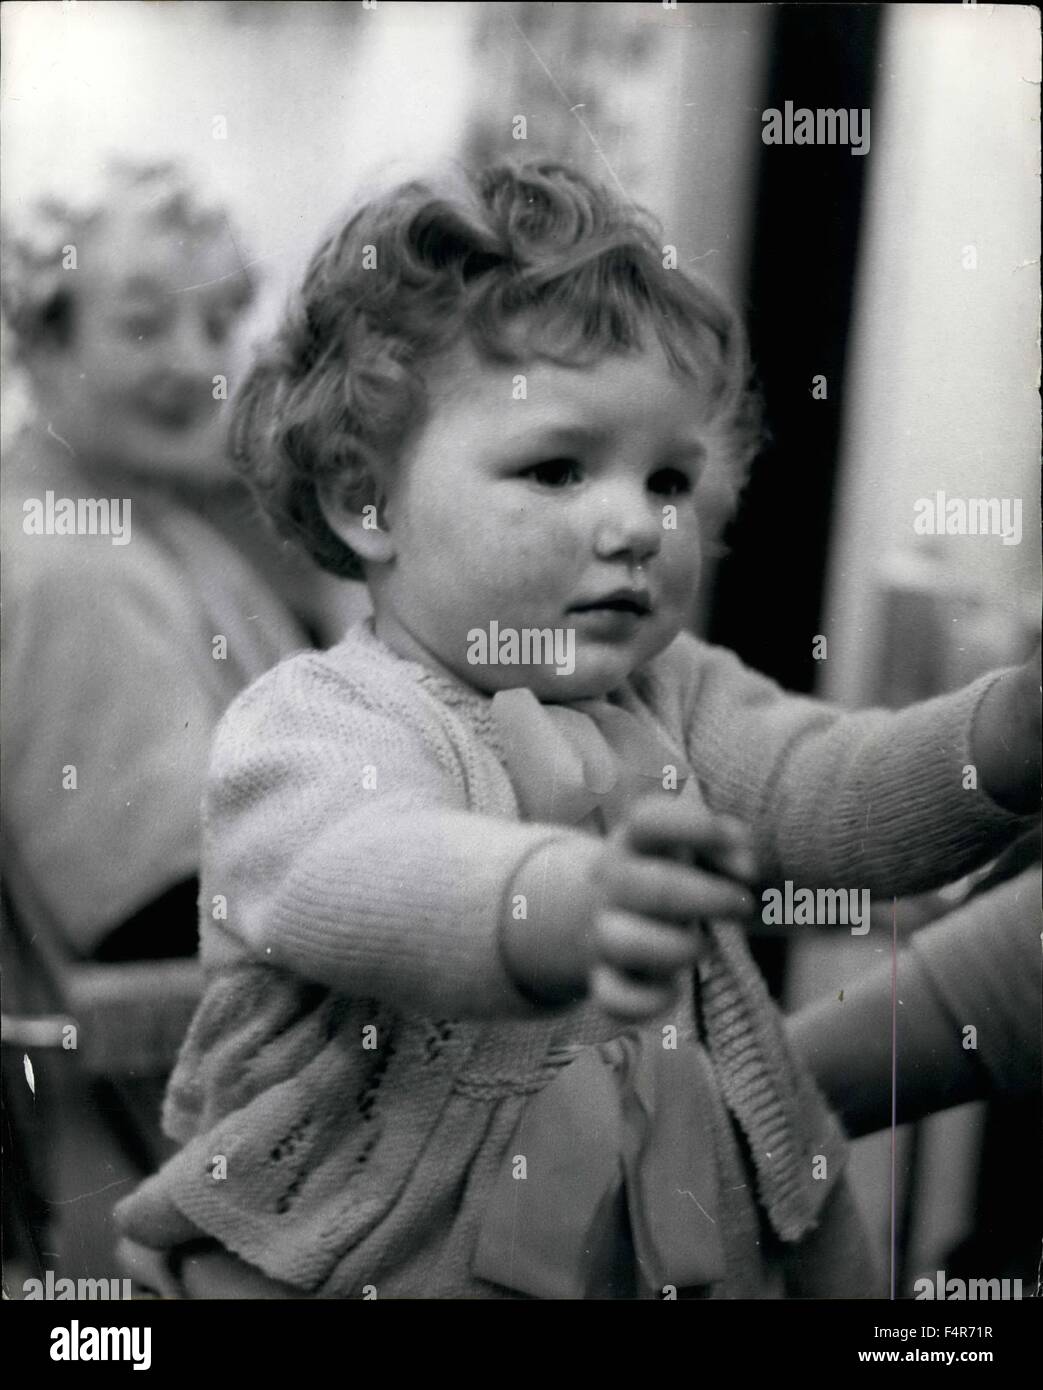 1955 - Baby Heather gets her first ''Perm'' ''Curly Head'' after the ordeal: Heather Tully walked into a beauty salon at Westlea, New Seaham, Co. Durham yesterday clutching her mother's hand and settled down to her first Permanent Wave. Hairdresser Pat Gilchrist said that the perm took almost an hour and Heather who is only twenty months old was as good as gold in fact the perfect customer no complaints. Her mother Mrs. Nora Tully, wife of a garage mechanic says that as Heather's hair is straight she will have a perm at least once a year. Photo shows Heather Tully with her curly head after the Stock Photo